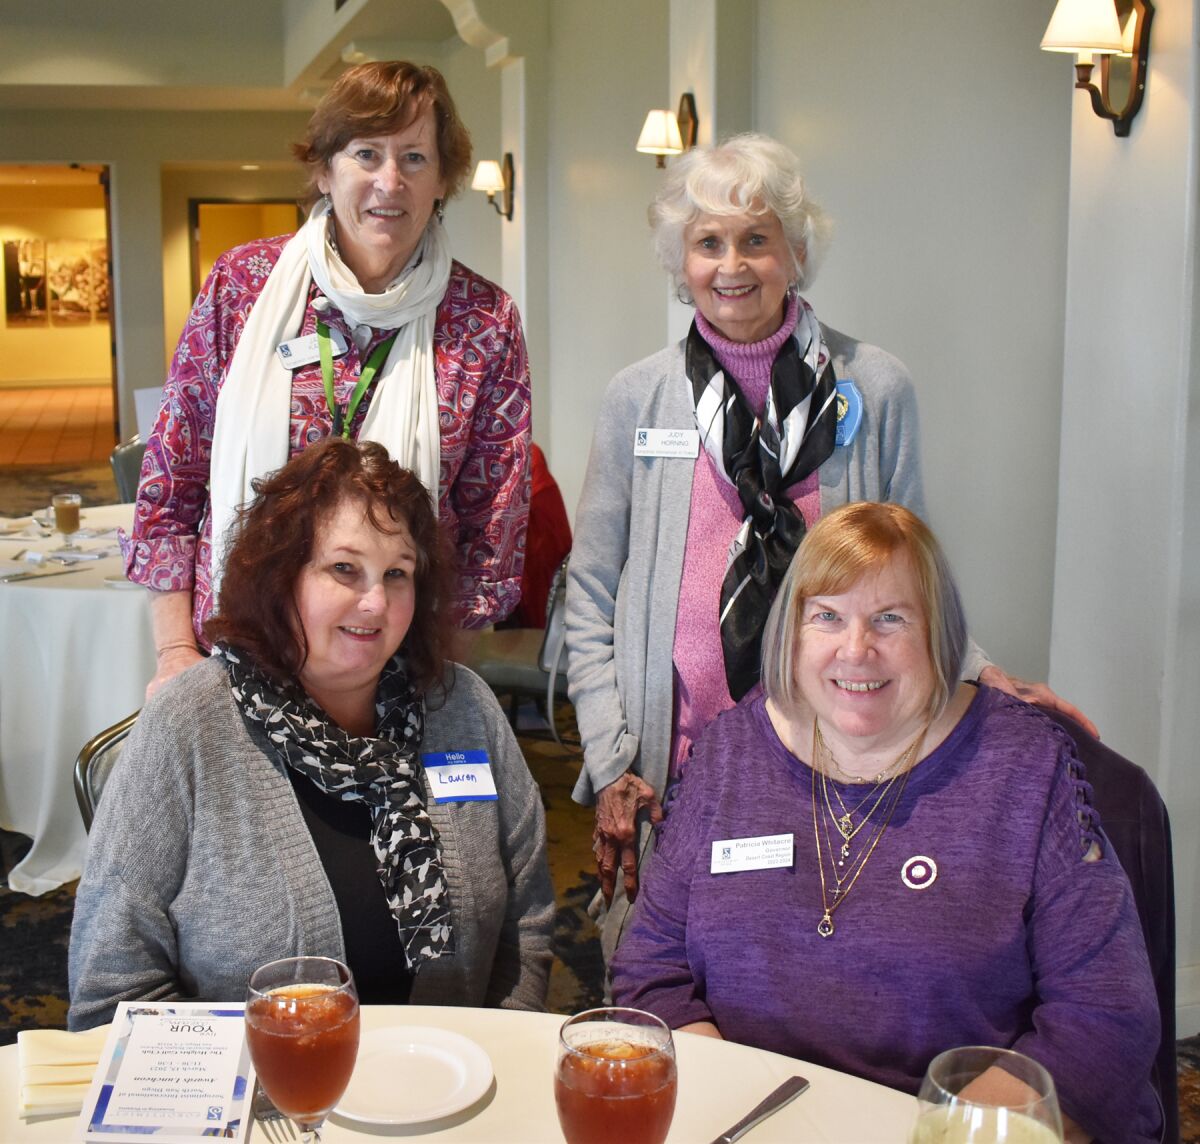 Seated Soroptimists Lauren Chin and Patricia Whitacre. Standing Jan Kane and Judy Horning.